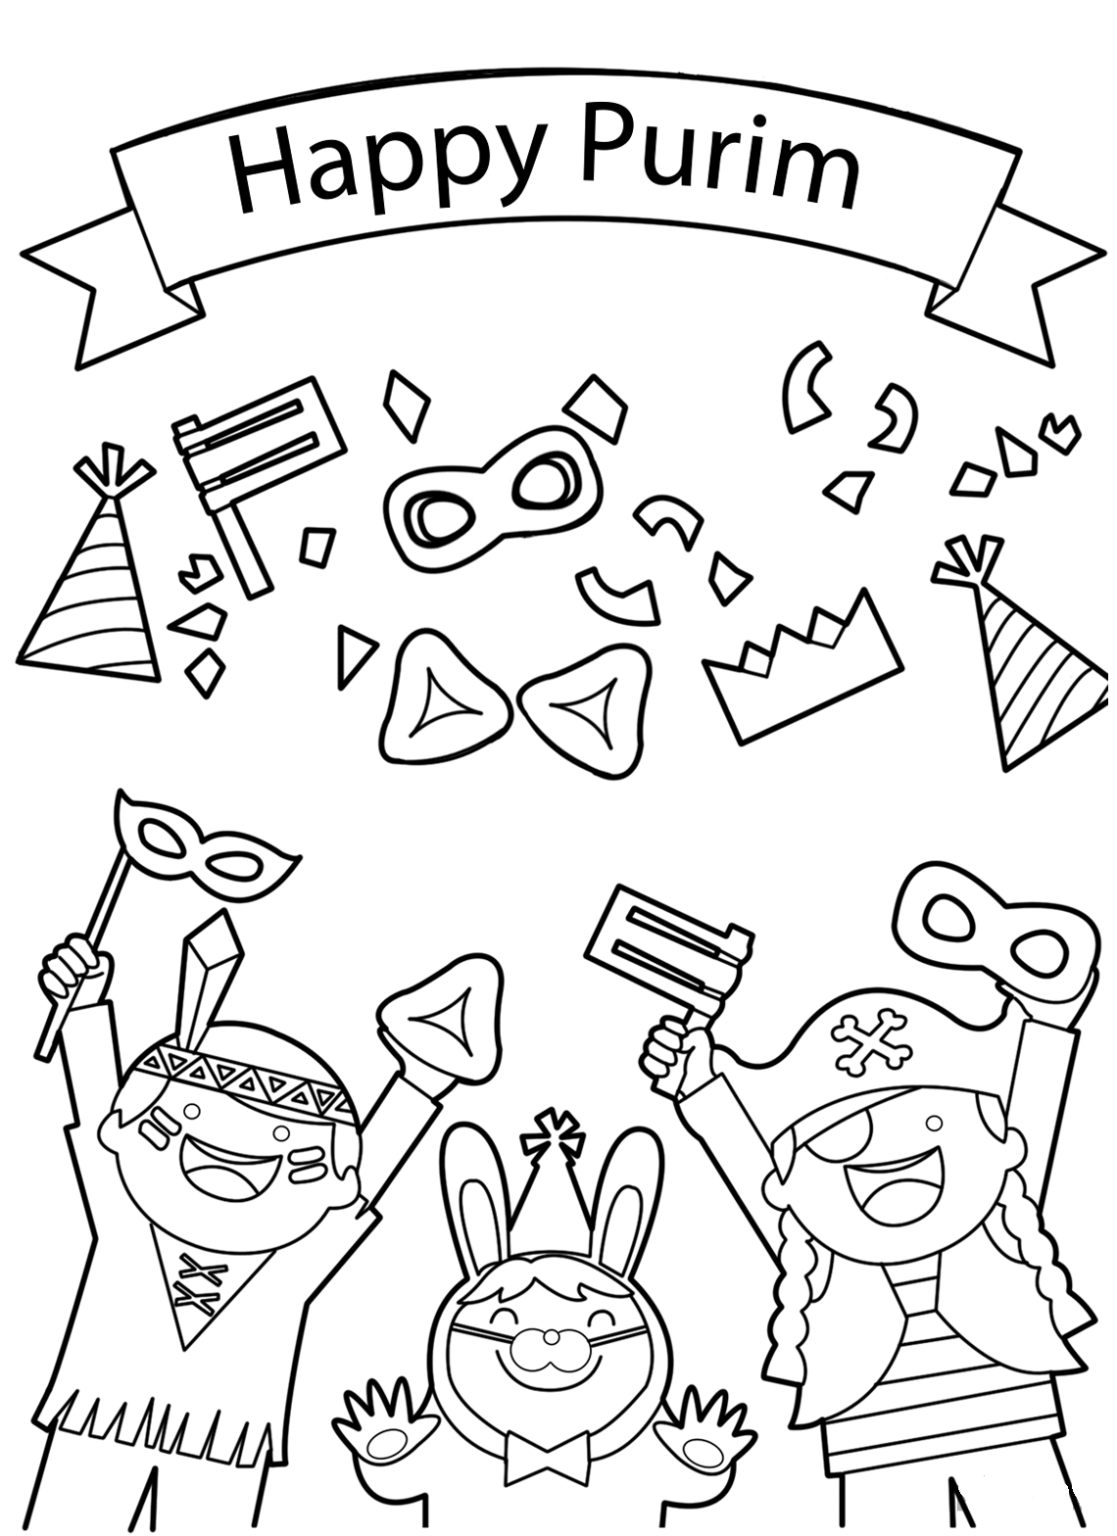 free-purim-coloring-pages-pdf-coloringfolder